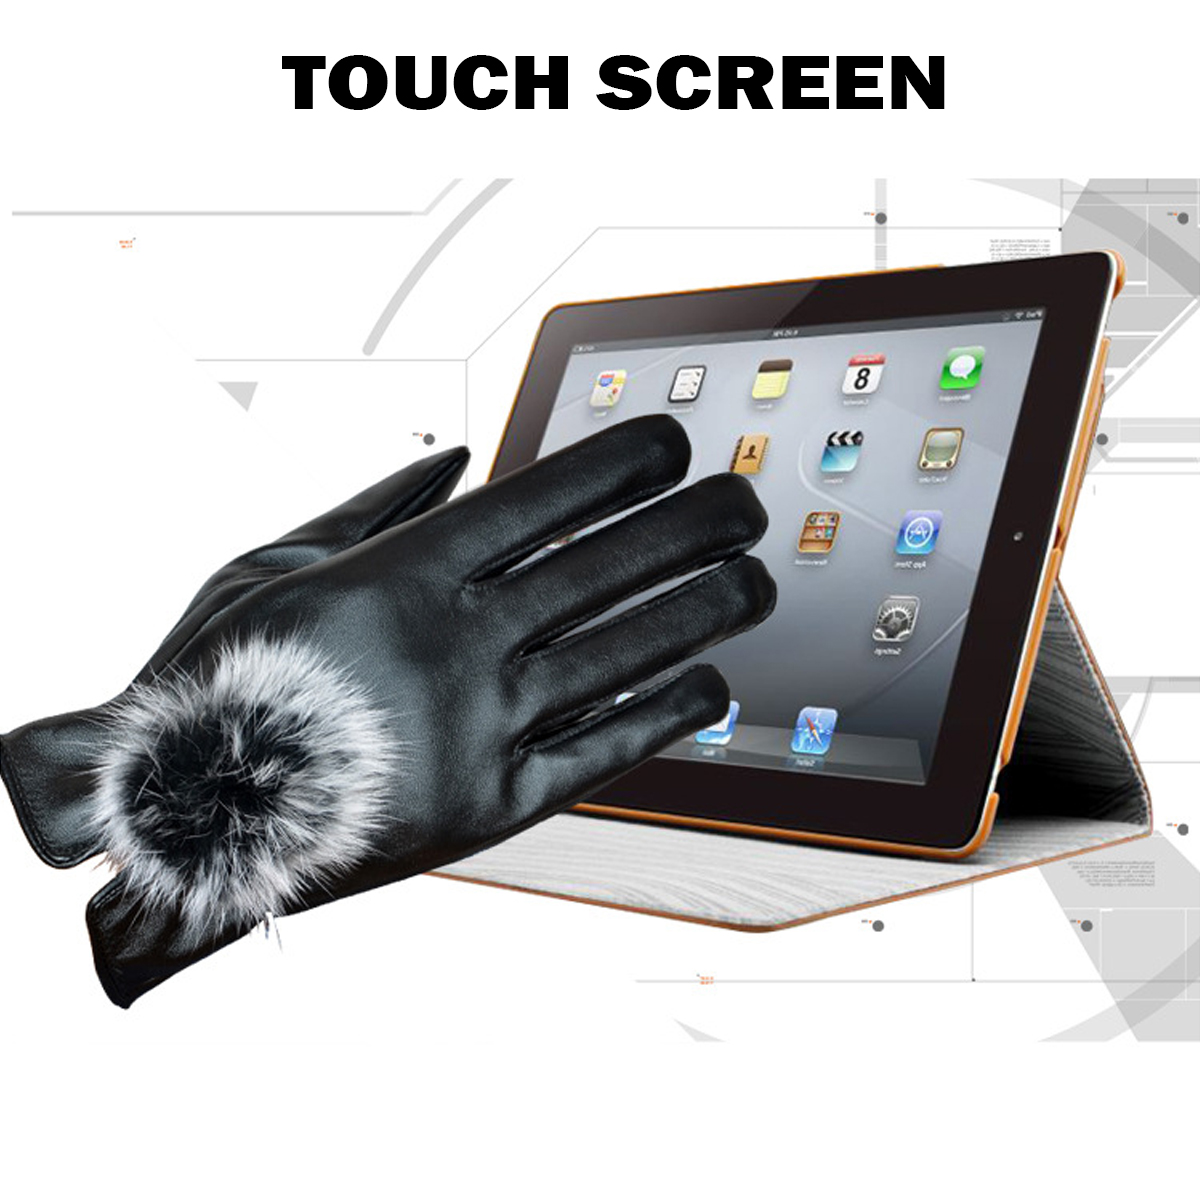 Winter-Warm-Thermal-Leather-Gloves-Touchscreen-Skiing-Snow-Snowboard-Cycling-Gloves-1610801-2